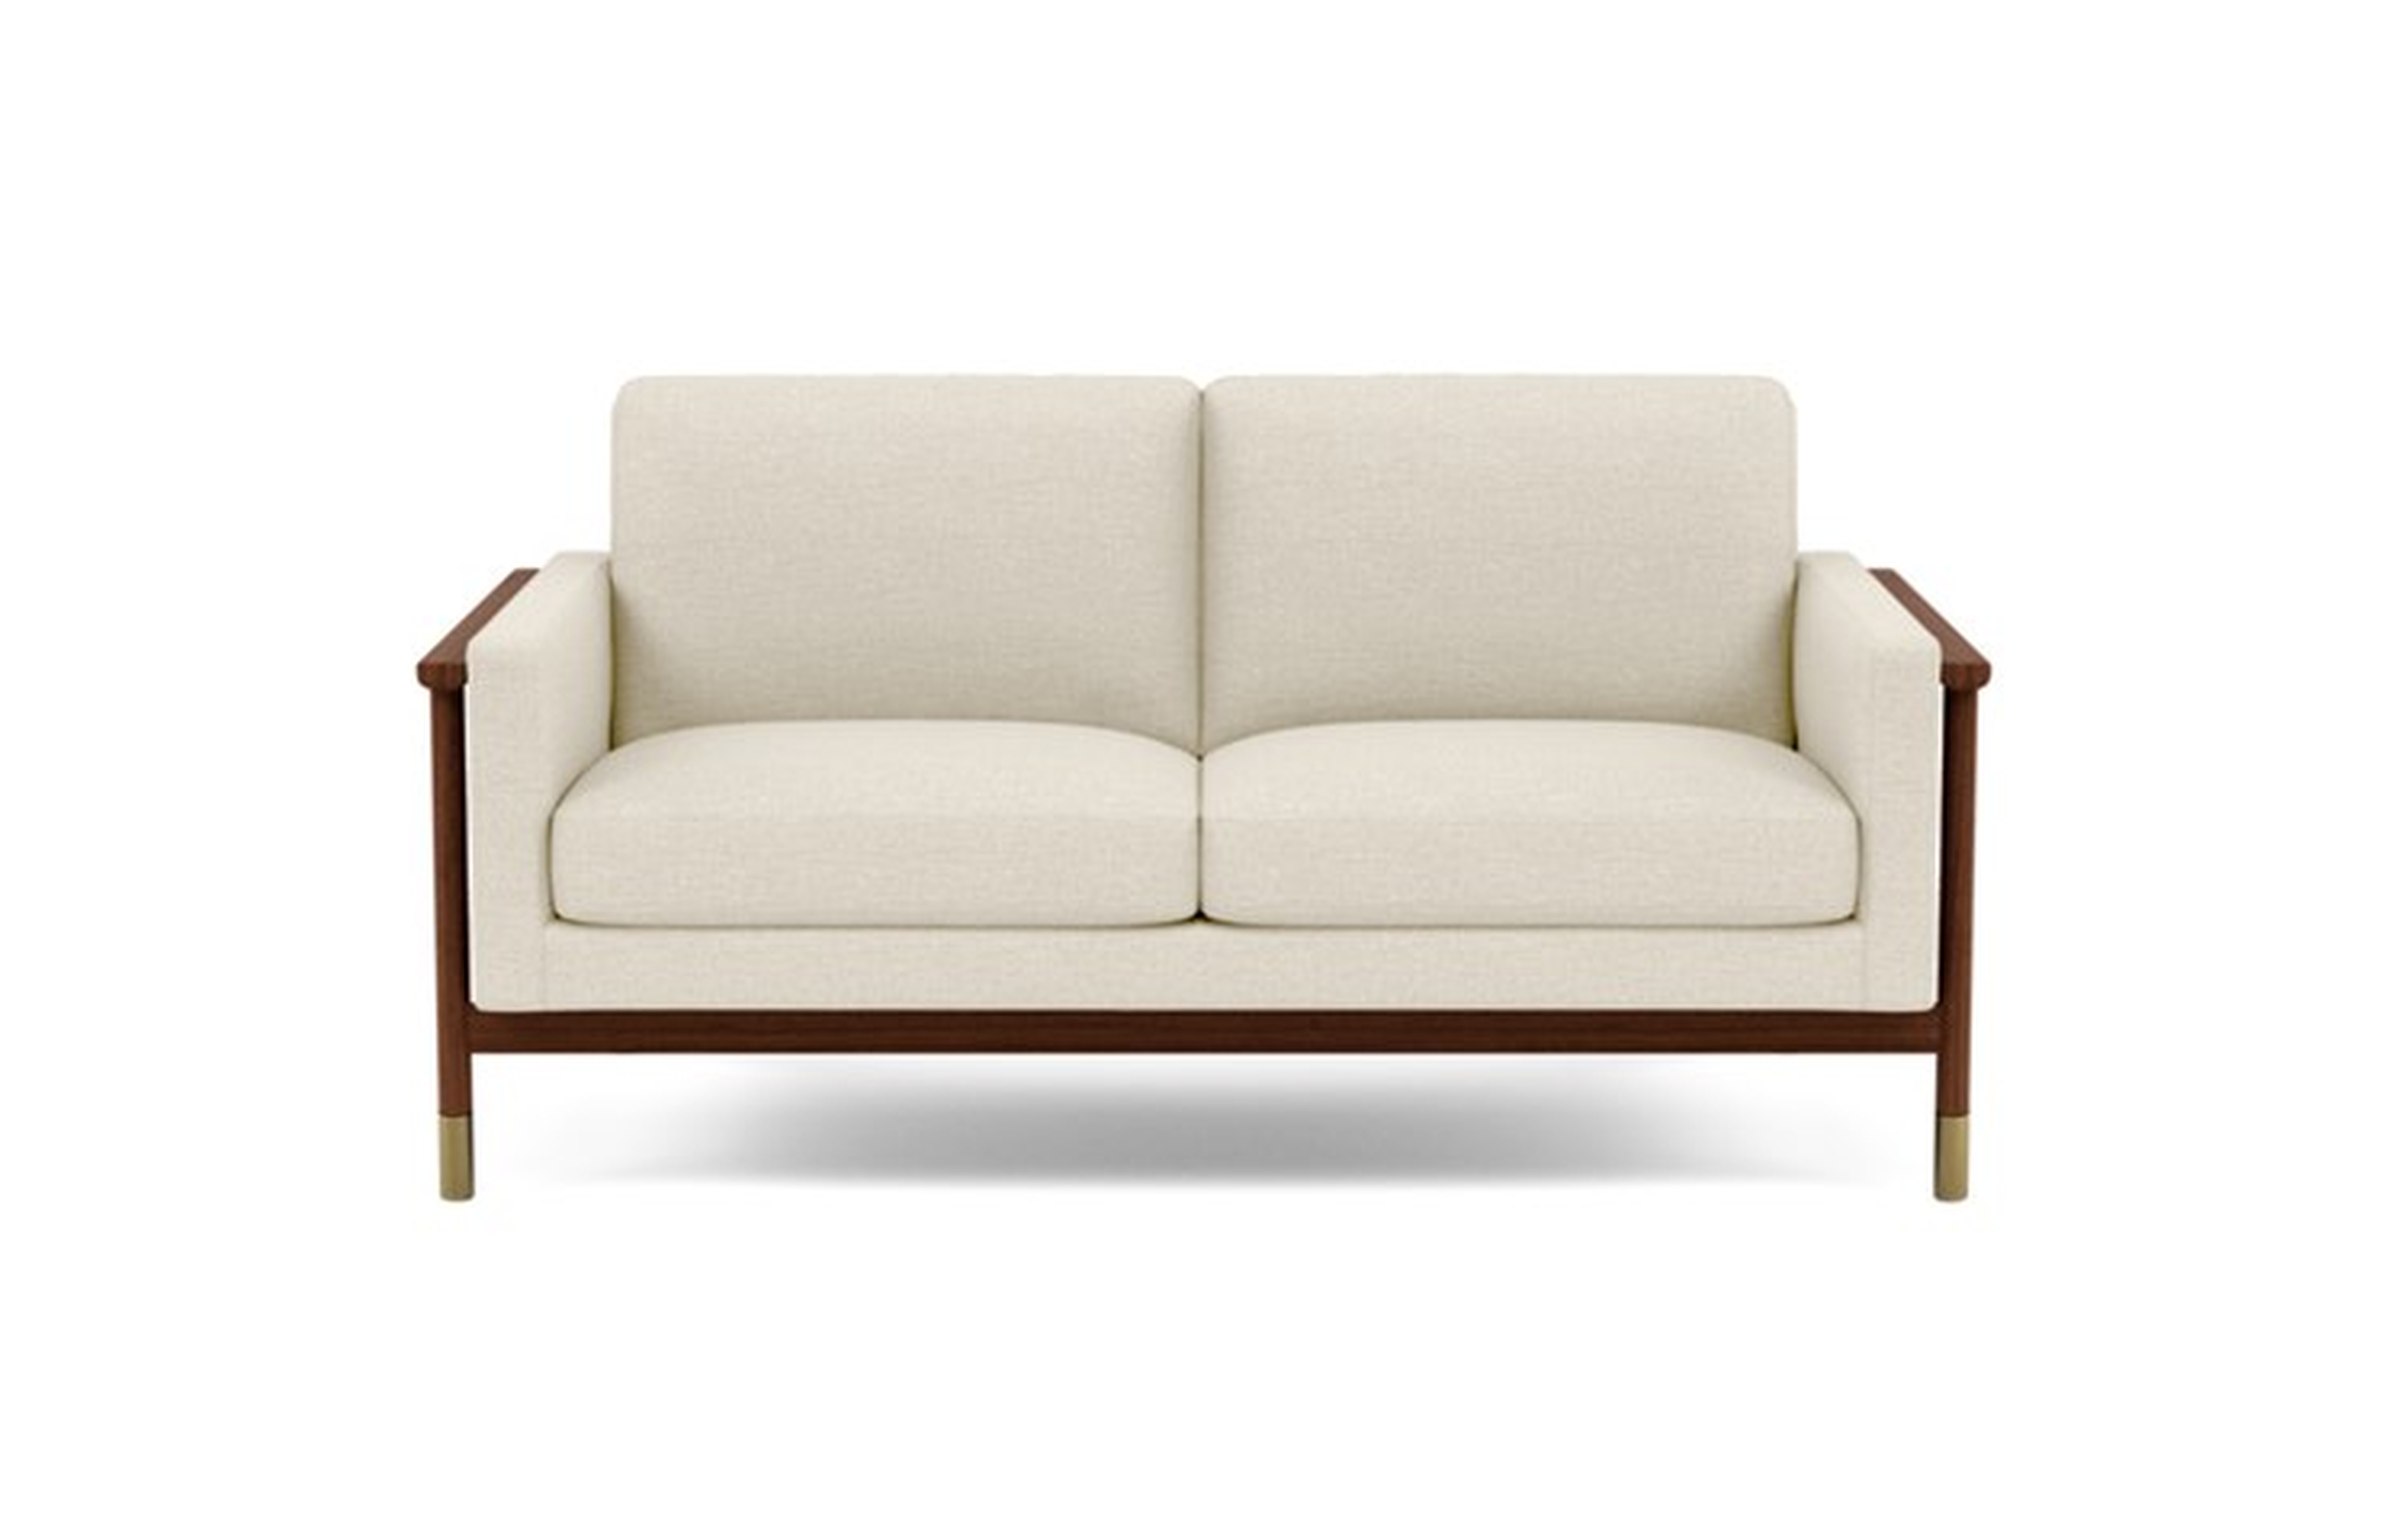 Jason Wu Loveseats with Beige Linen Fabric and Oiled Walnut with Brass Cap legs - Interior Define